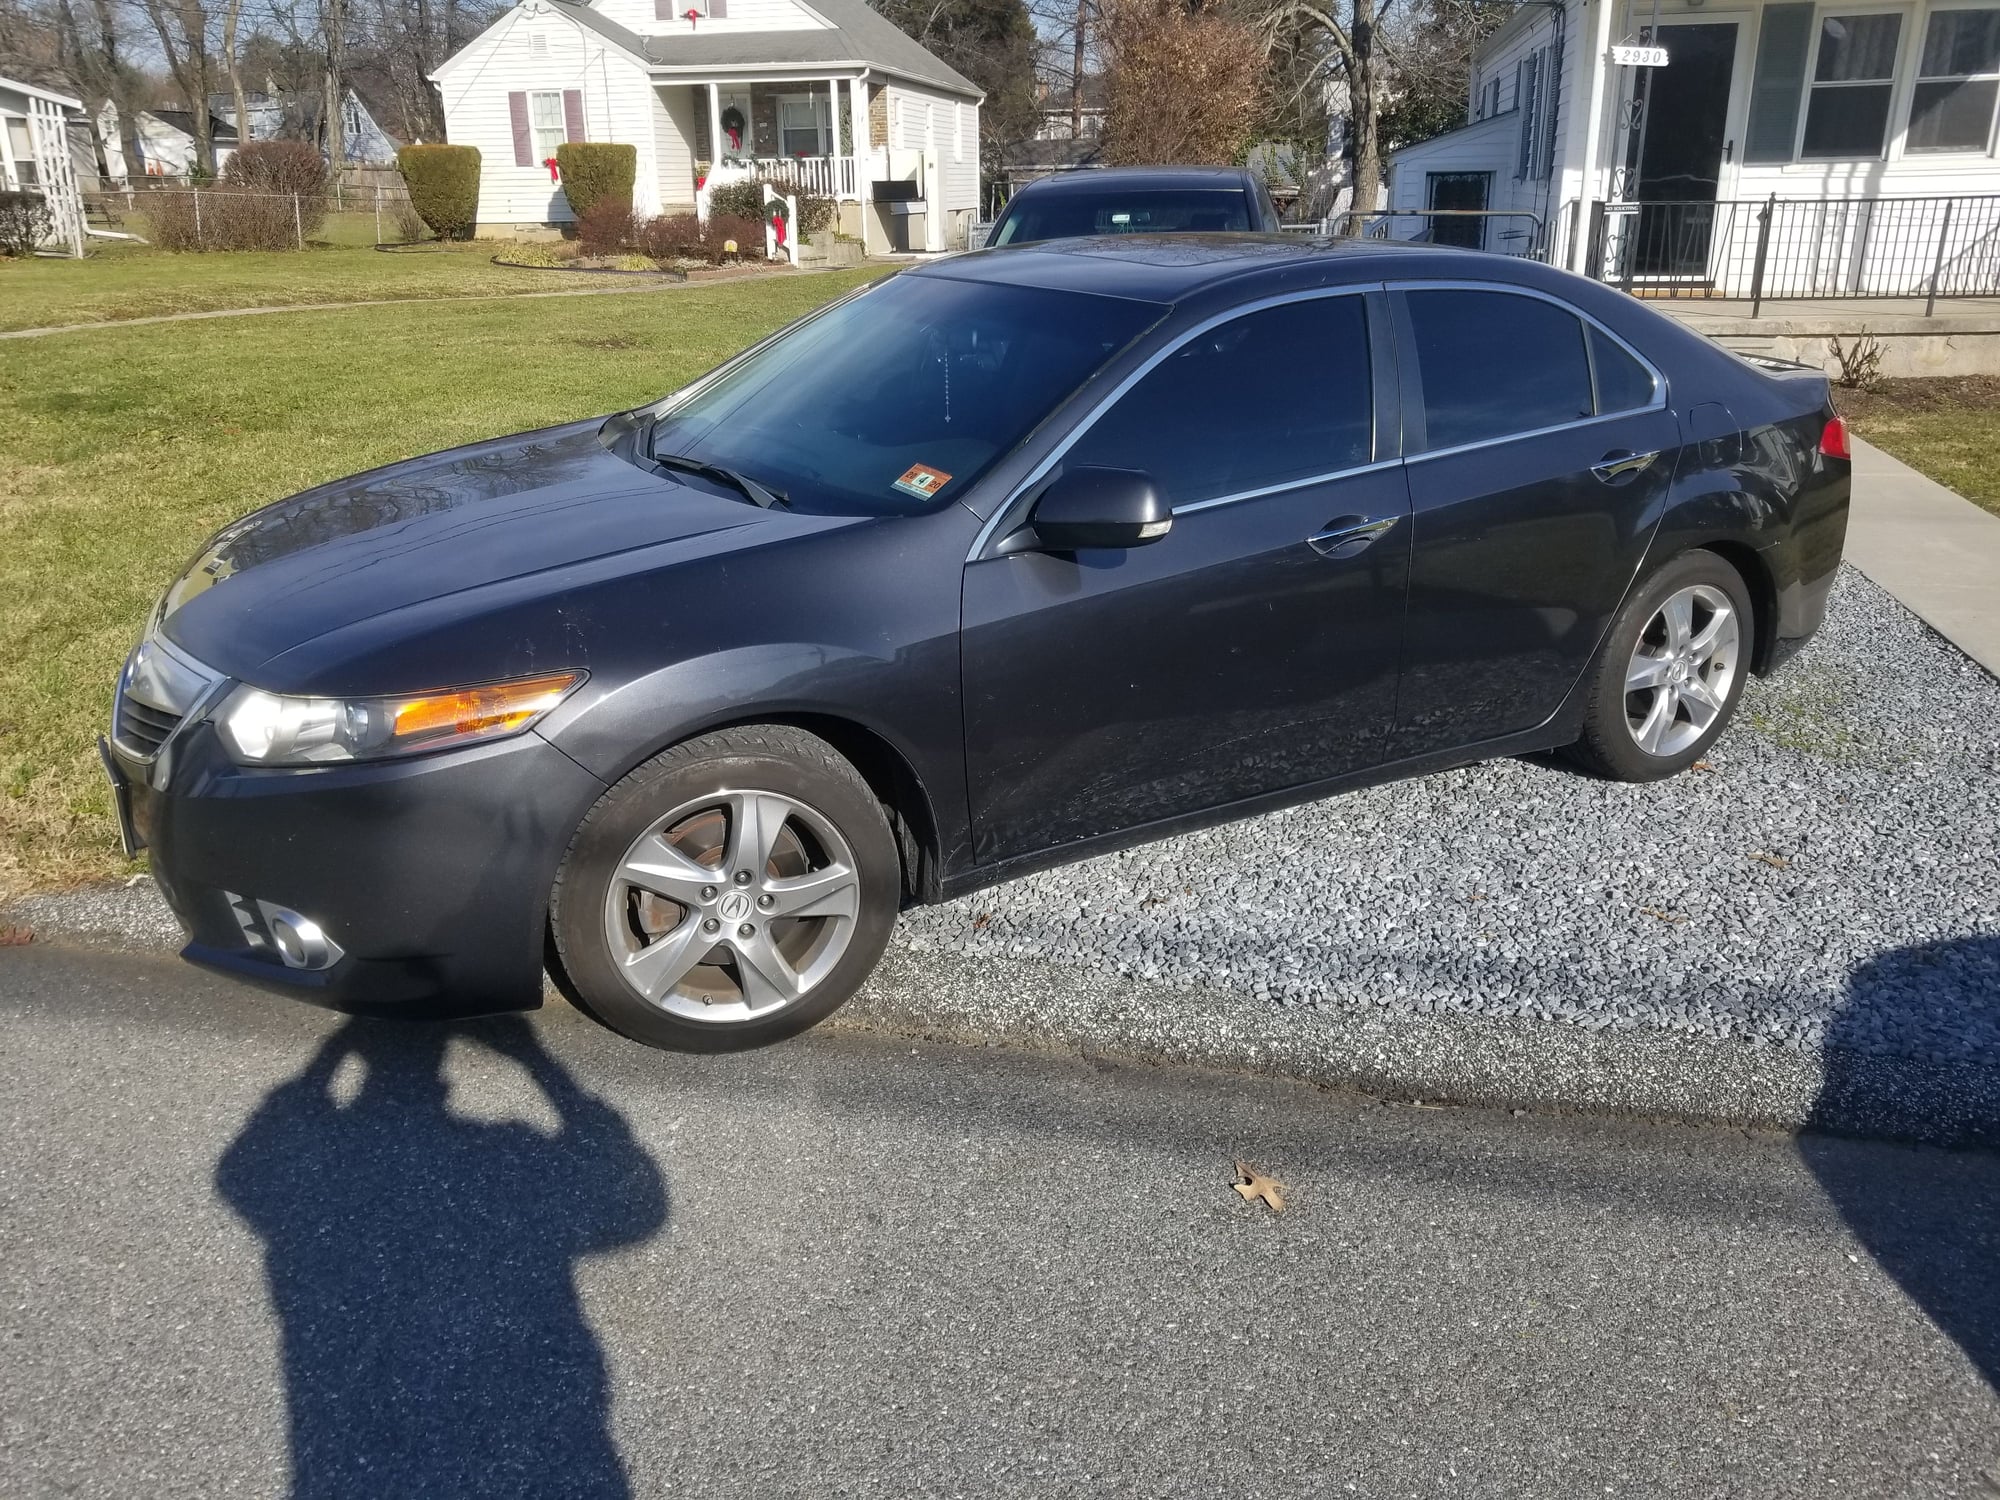 2013 Acura TSX - FS: TSX 2013 with 99K Miles - Used - VIN JH4CU2F66DC002928 - 98,500 Miles - 4 cyl - 2WD - Automatic - Sedan - Gray - Kearny, NJ 07032, United States